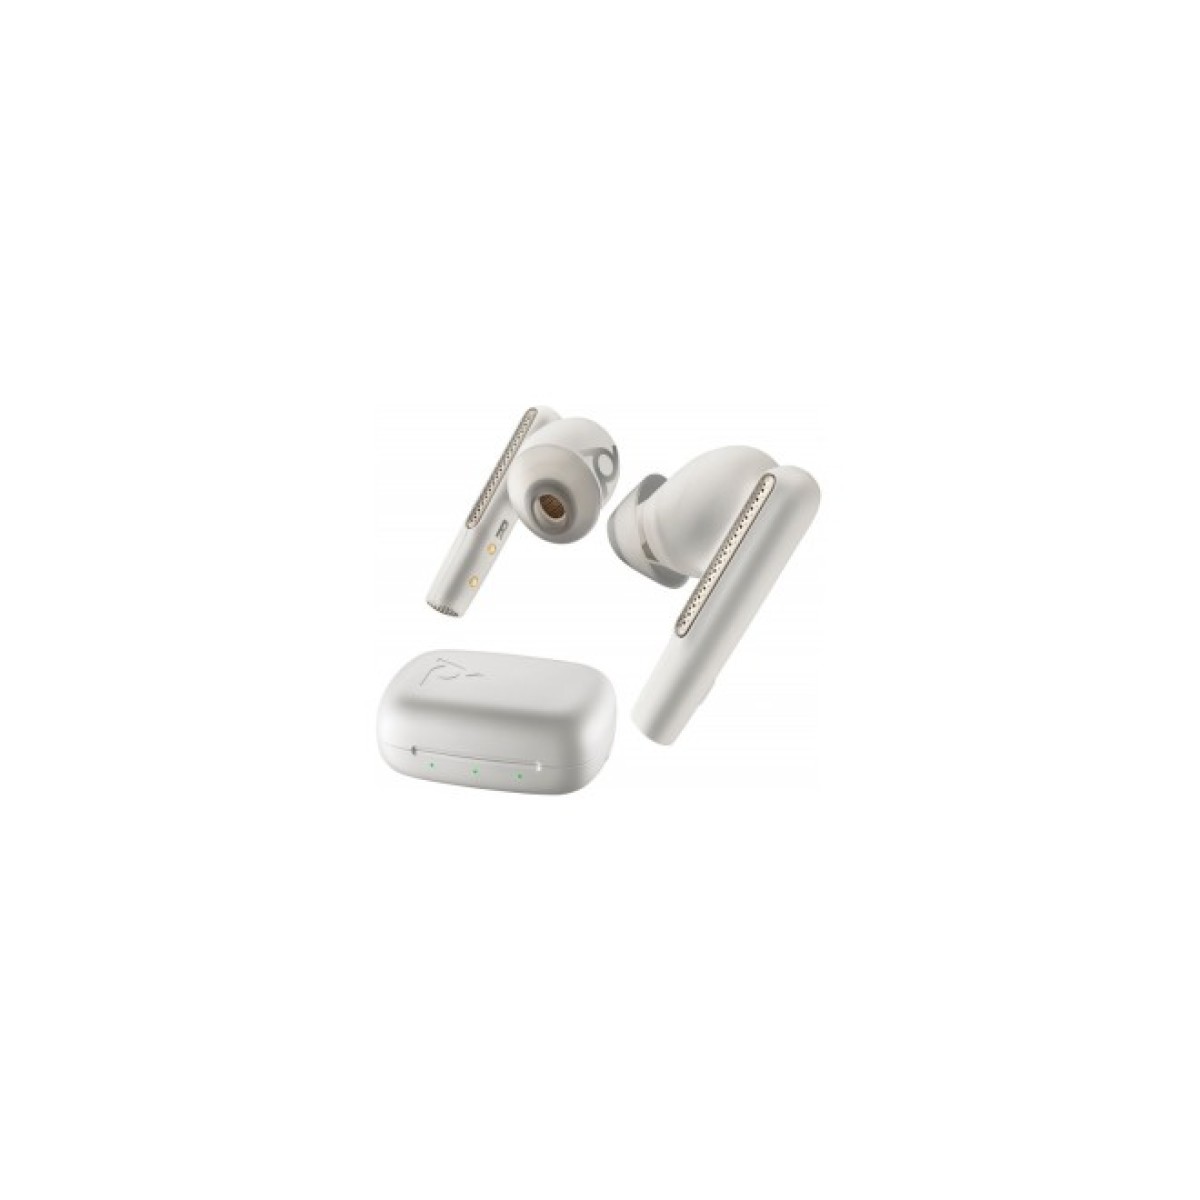 Наушники Poly Voyager Free 60 Earbuds + BT700C + BCHC White (7Y8L4AA) 98_98.jpg - фото 4